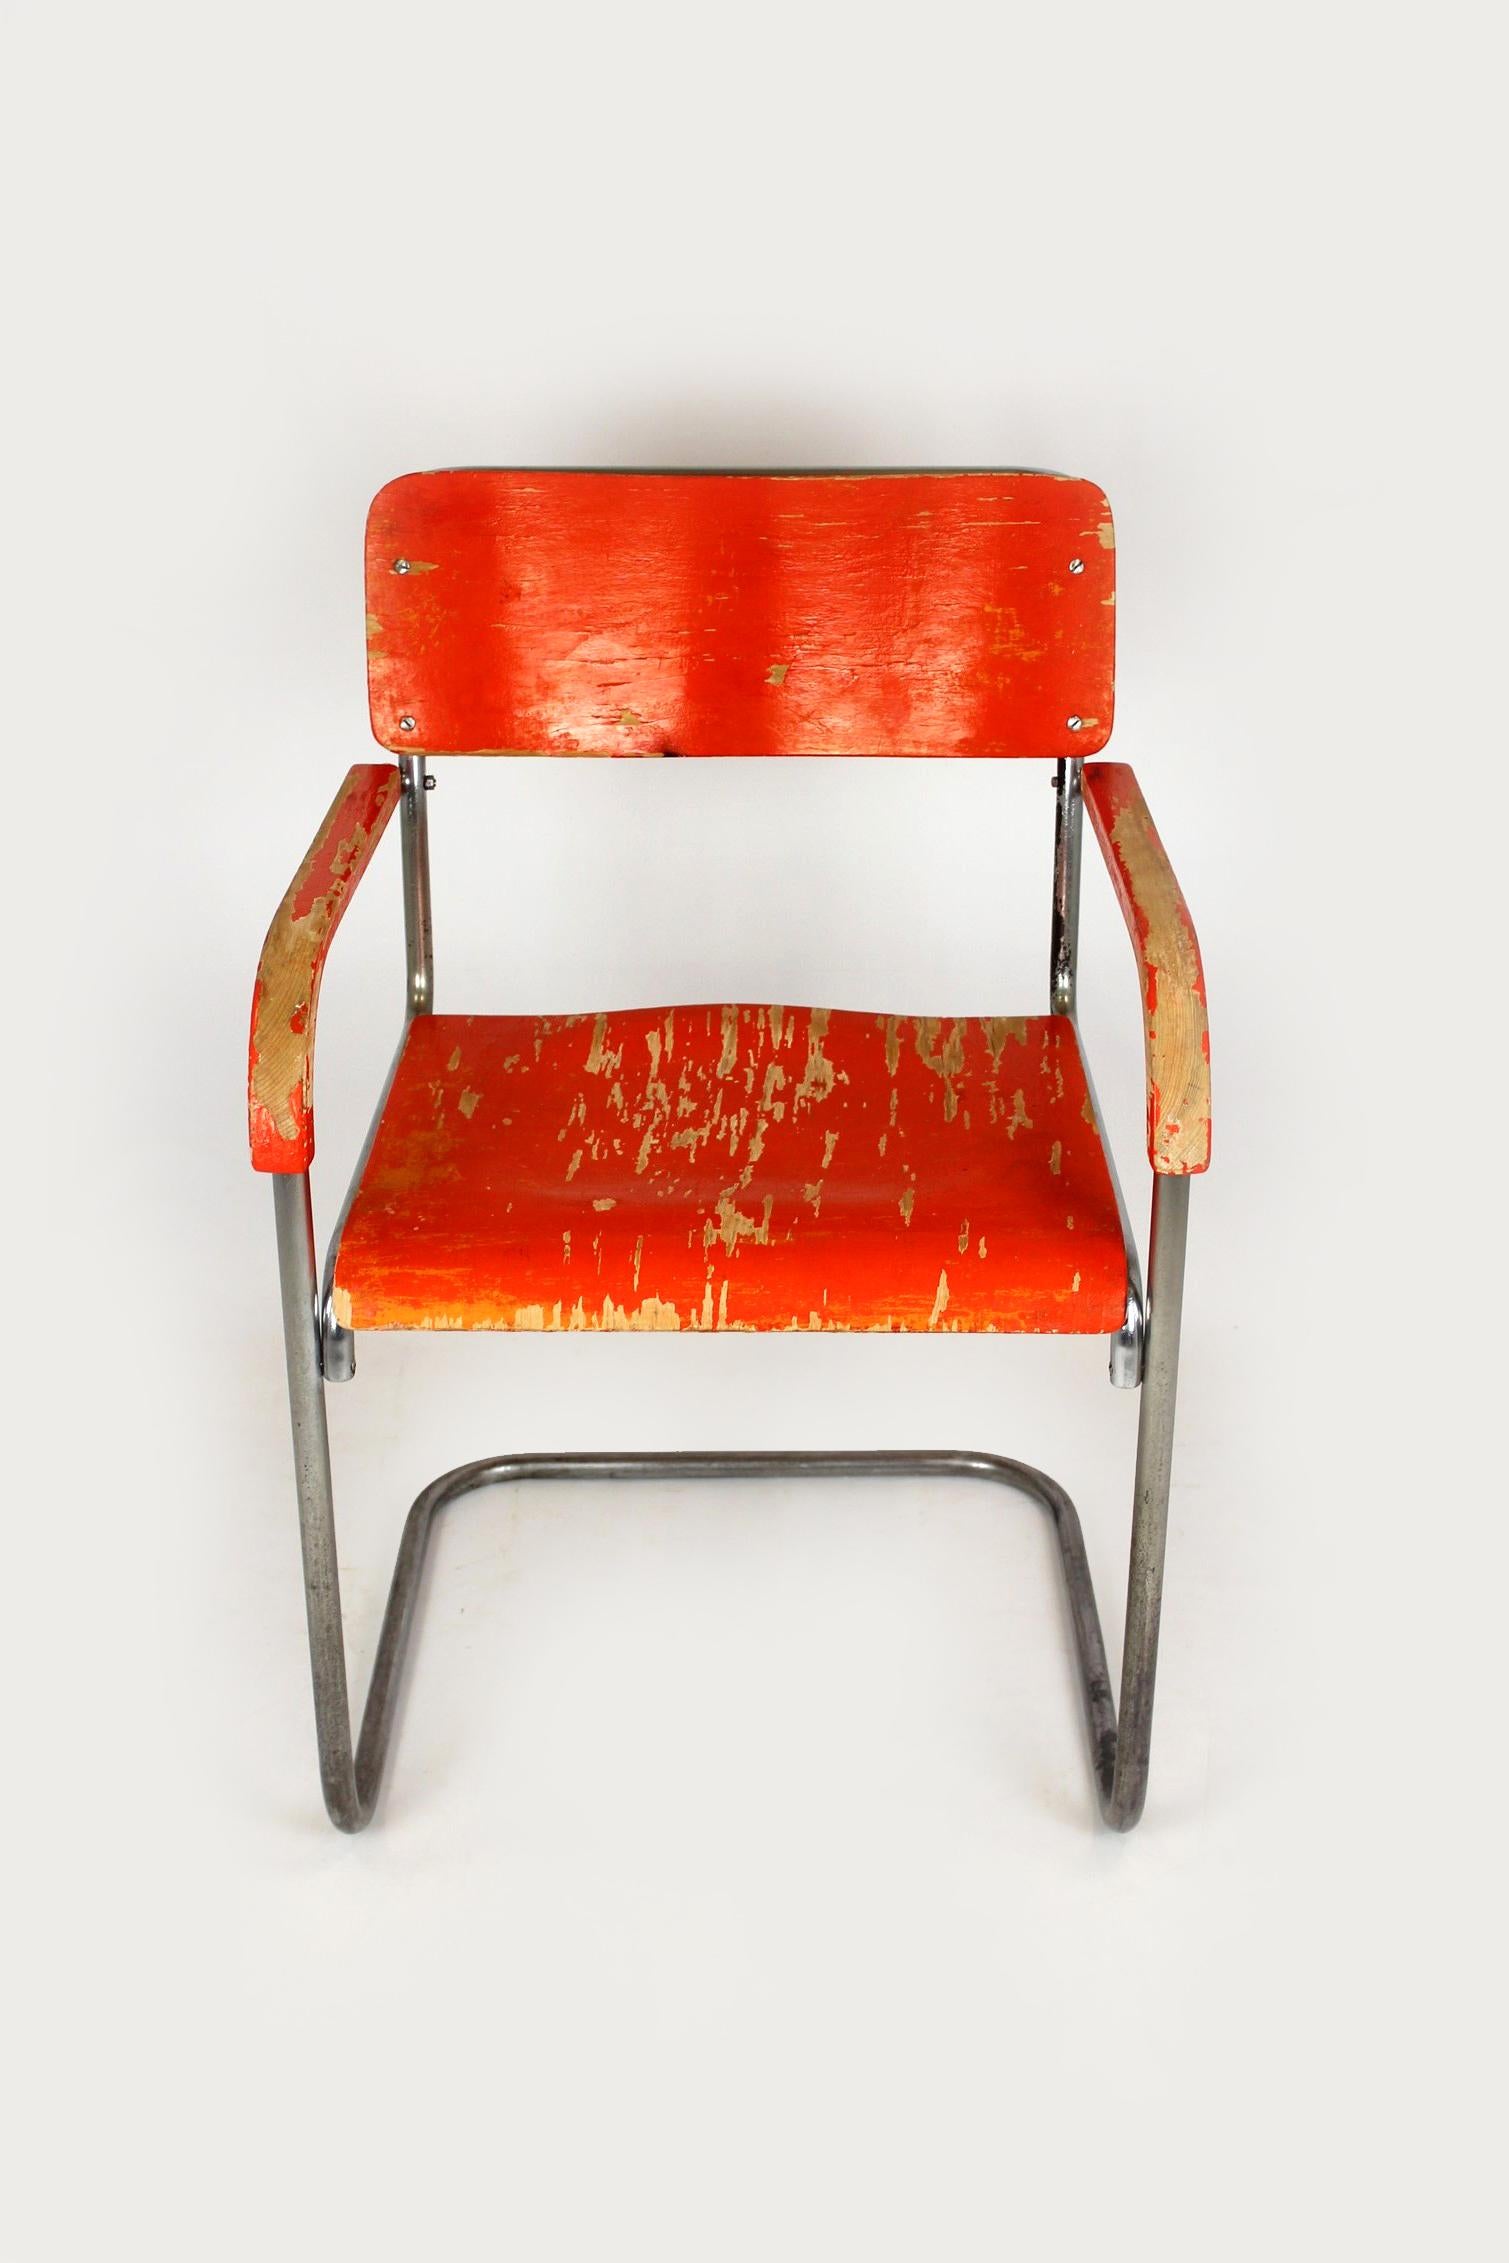 
This tubular steel chair, type B34, was designed in 1928 by Marcel Breuer. This is an early and rare version with a seat and backrest made of plywood, probably made in the early 1930s. The chair is in original condition with visible patina.